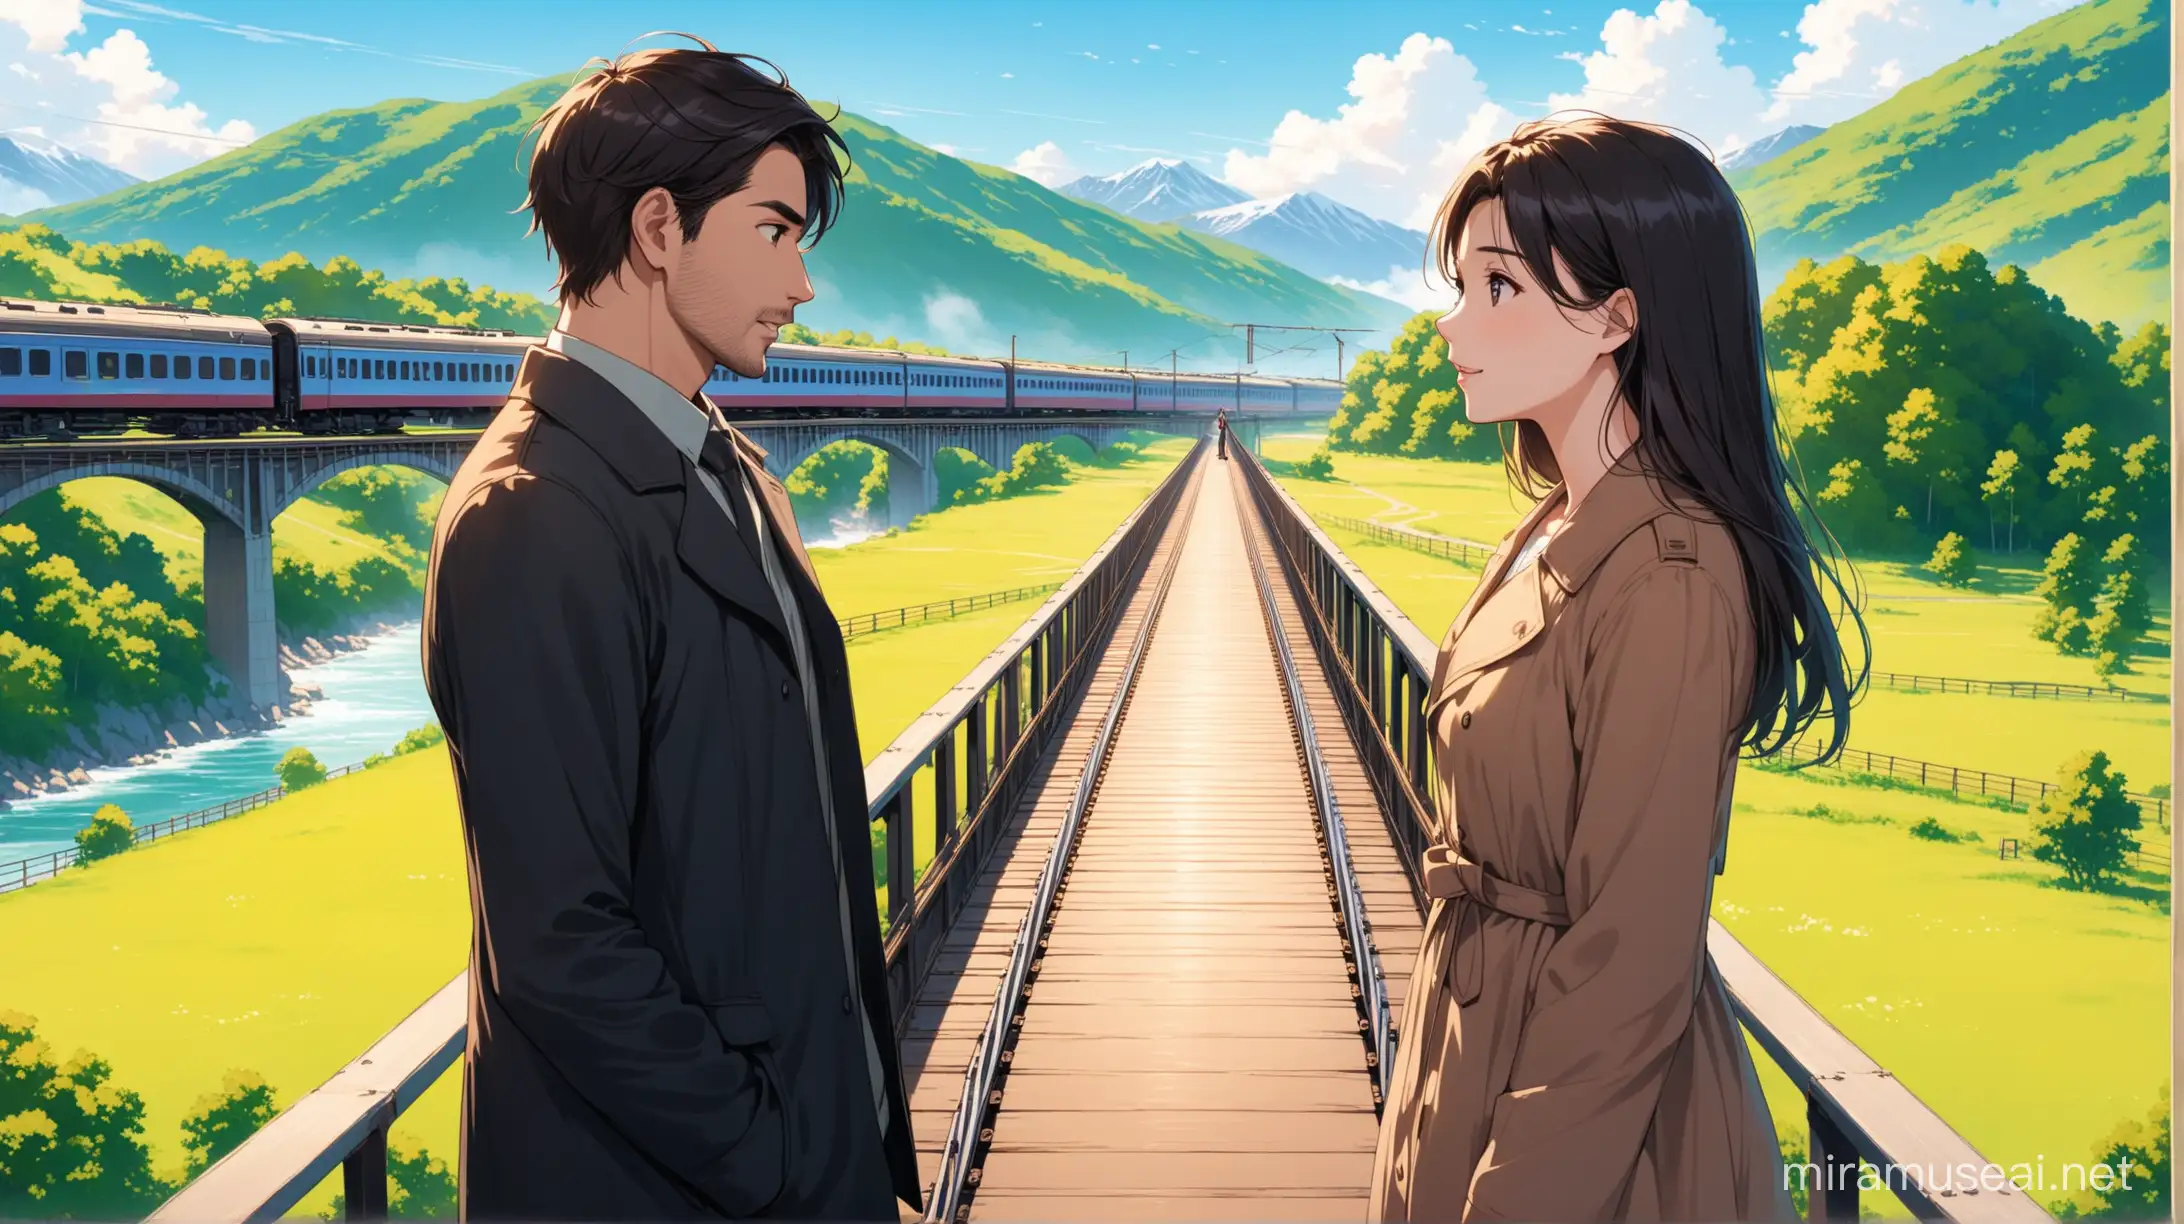 A man and a woman are standing on a bridge and talking face to face. The background is a moving train with beautiful scenery